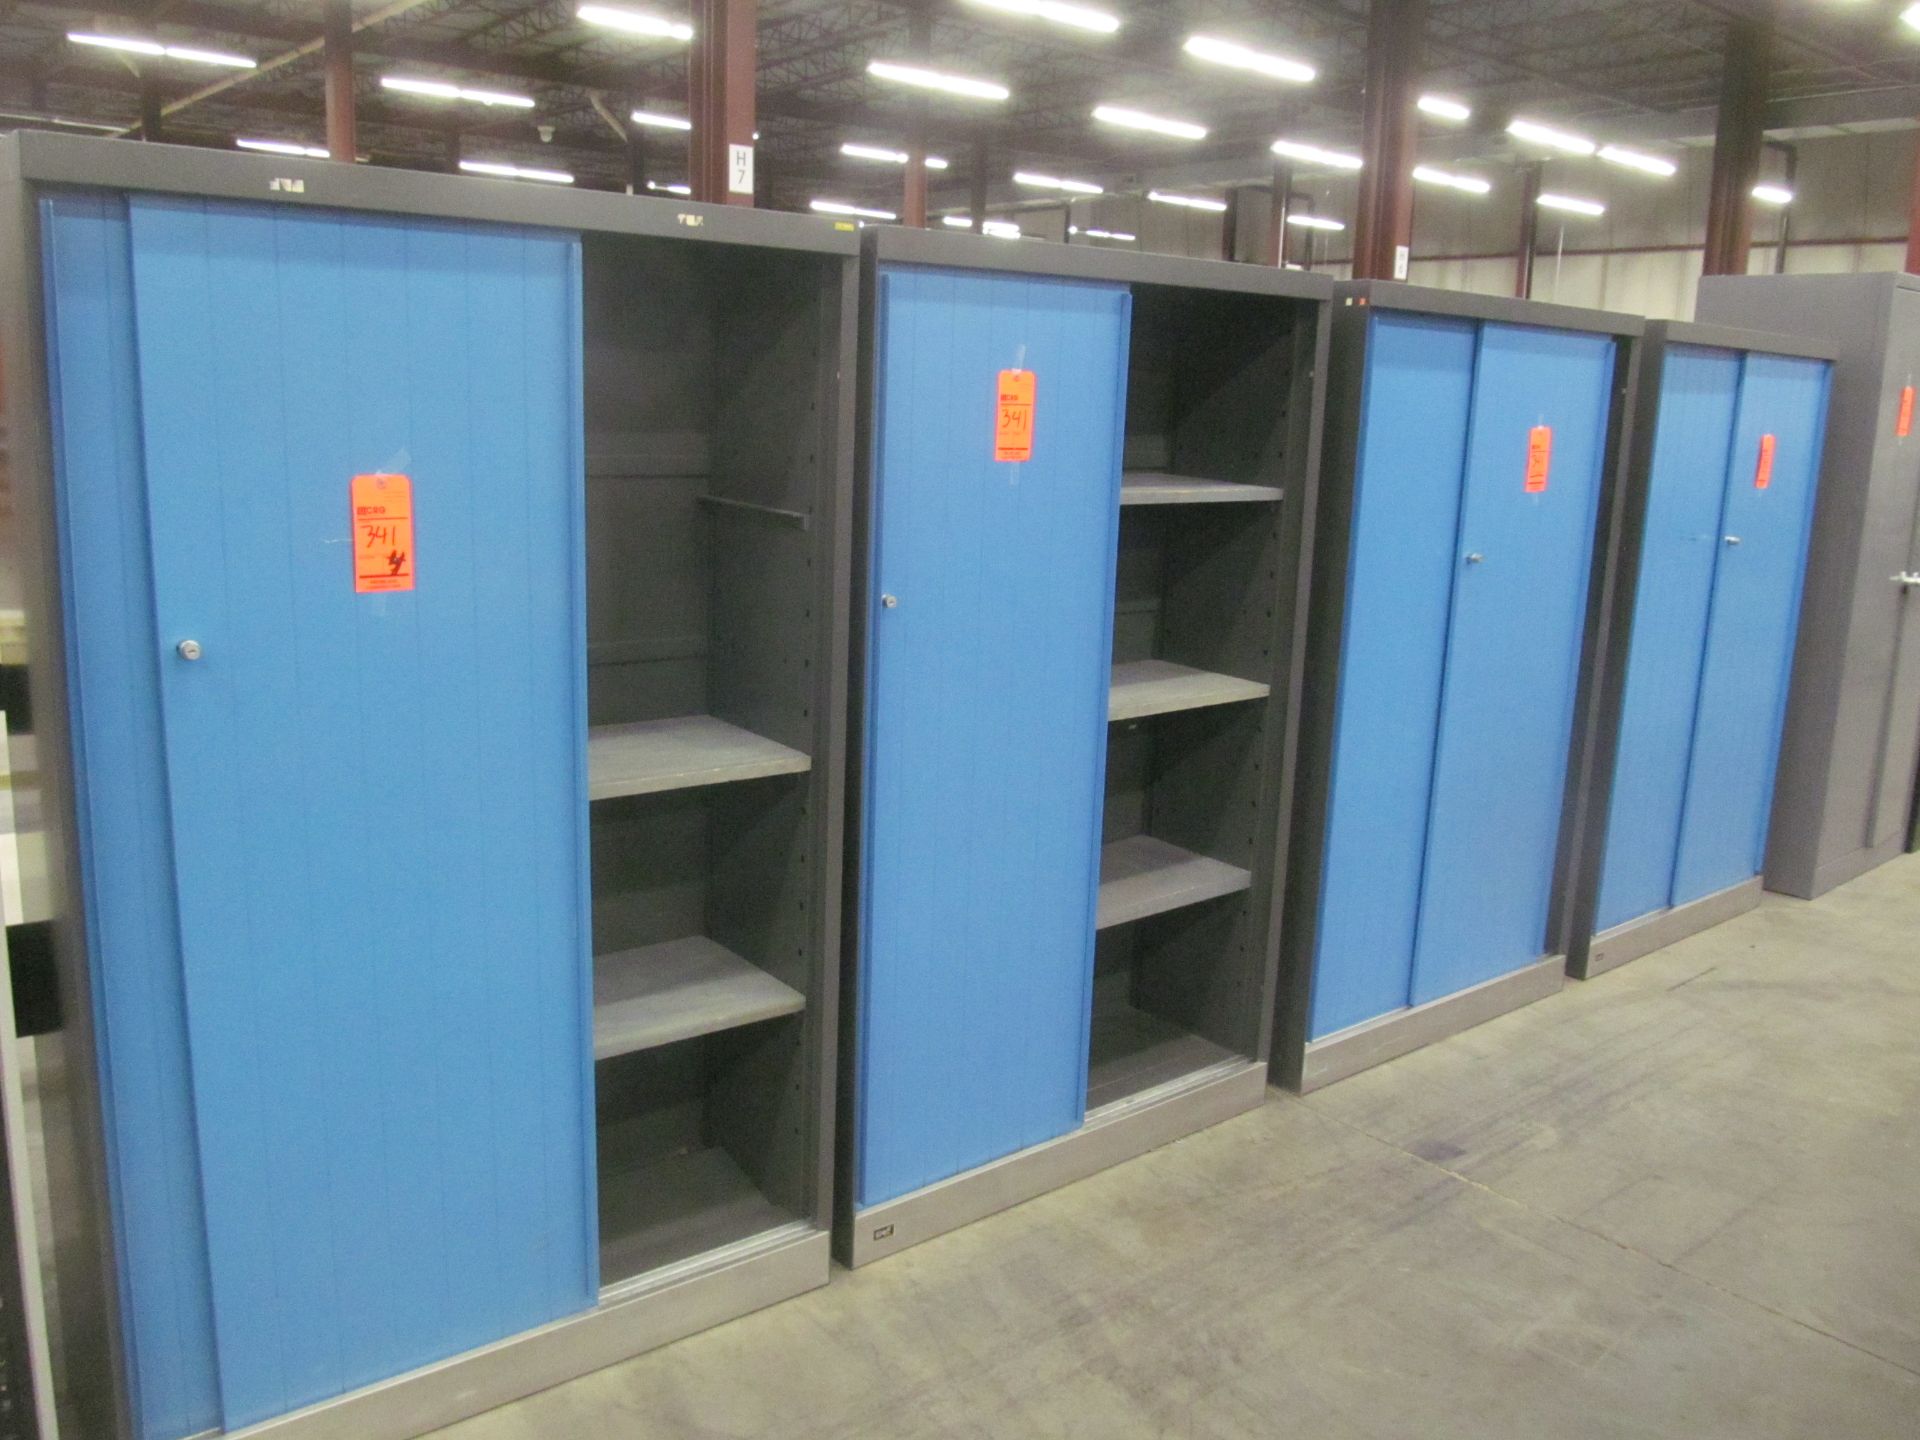 Lot of (4) metal storage cabinets, with dual sliding doors, 44" x 16" x 70"